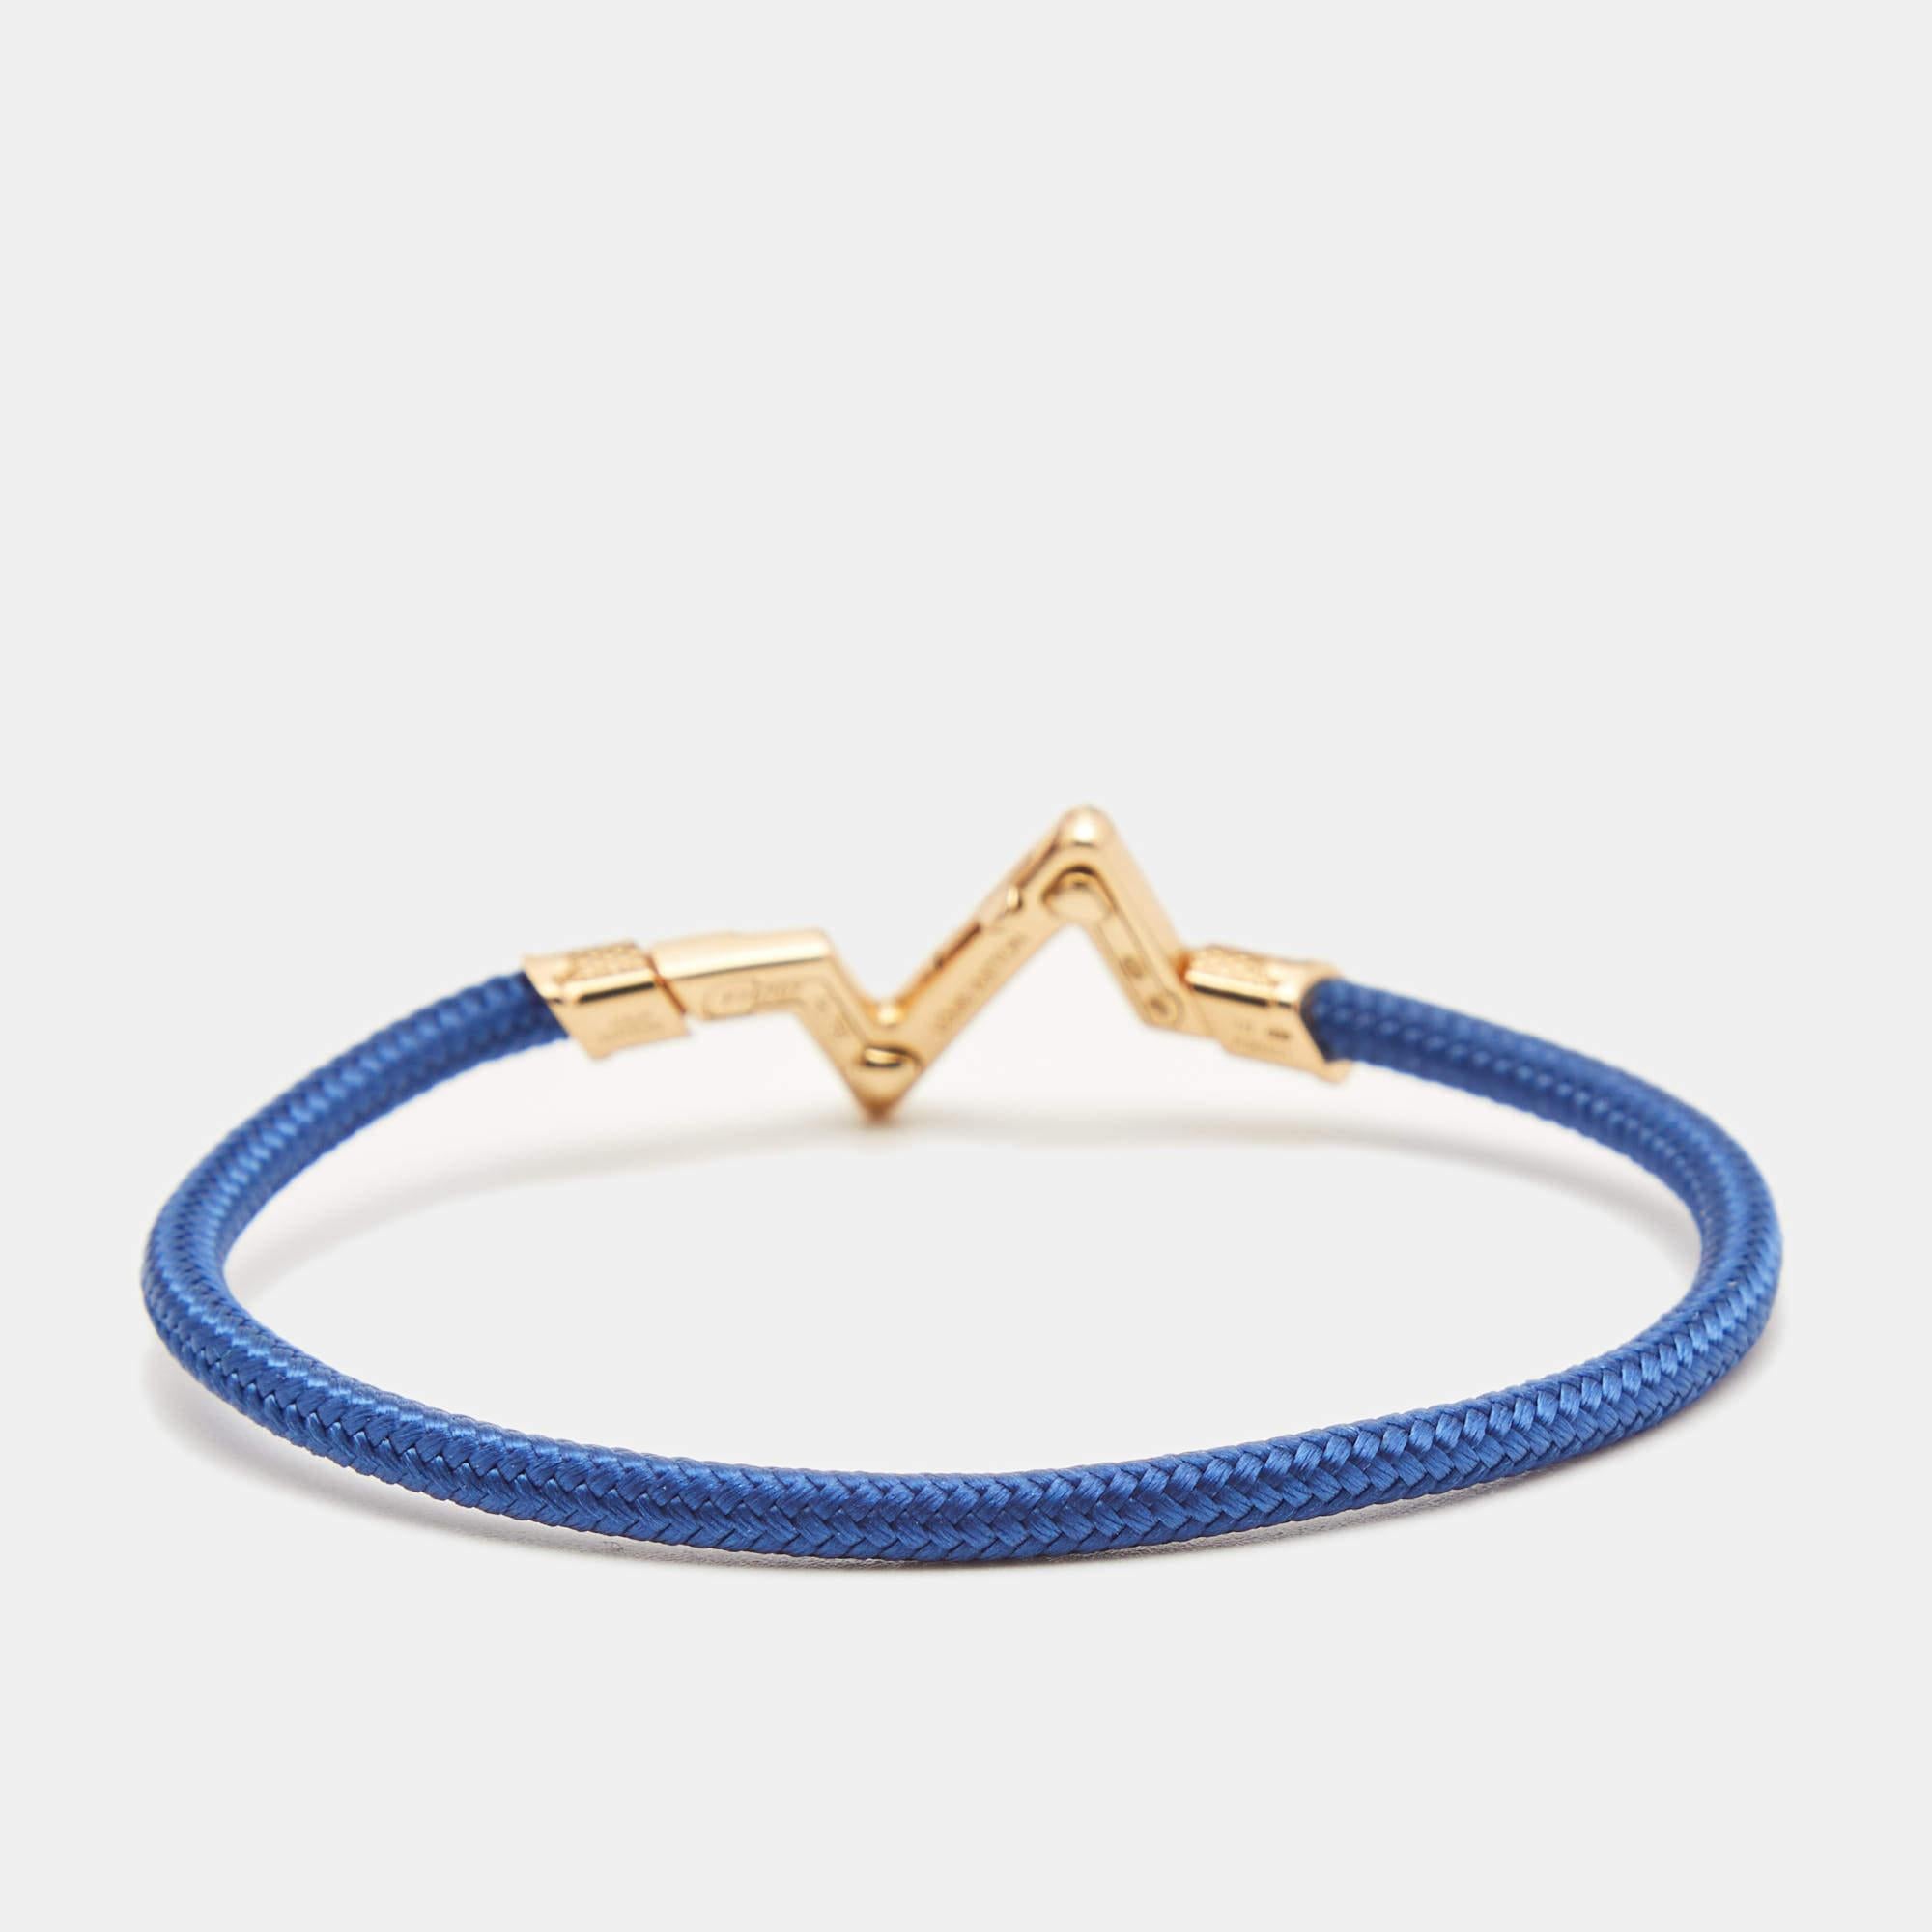 Ultra-modern and chic in design, this Louis Vuitton bracelet exhibits contemporary fashion. The luxe design is set with distinct elements to give the creation a classy touch. This sweet piece will look great when paired with other bracelets and even